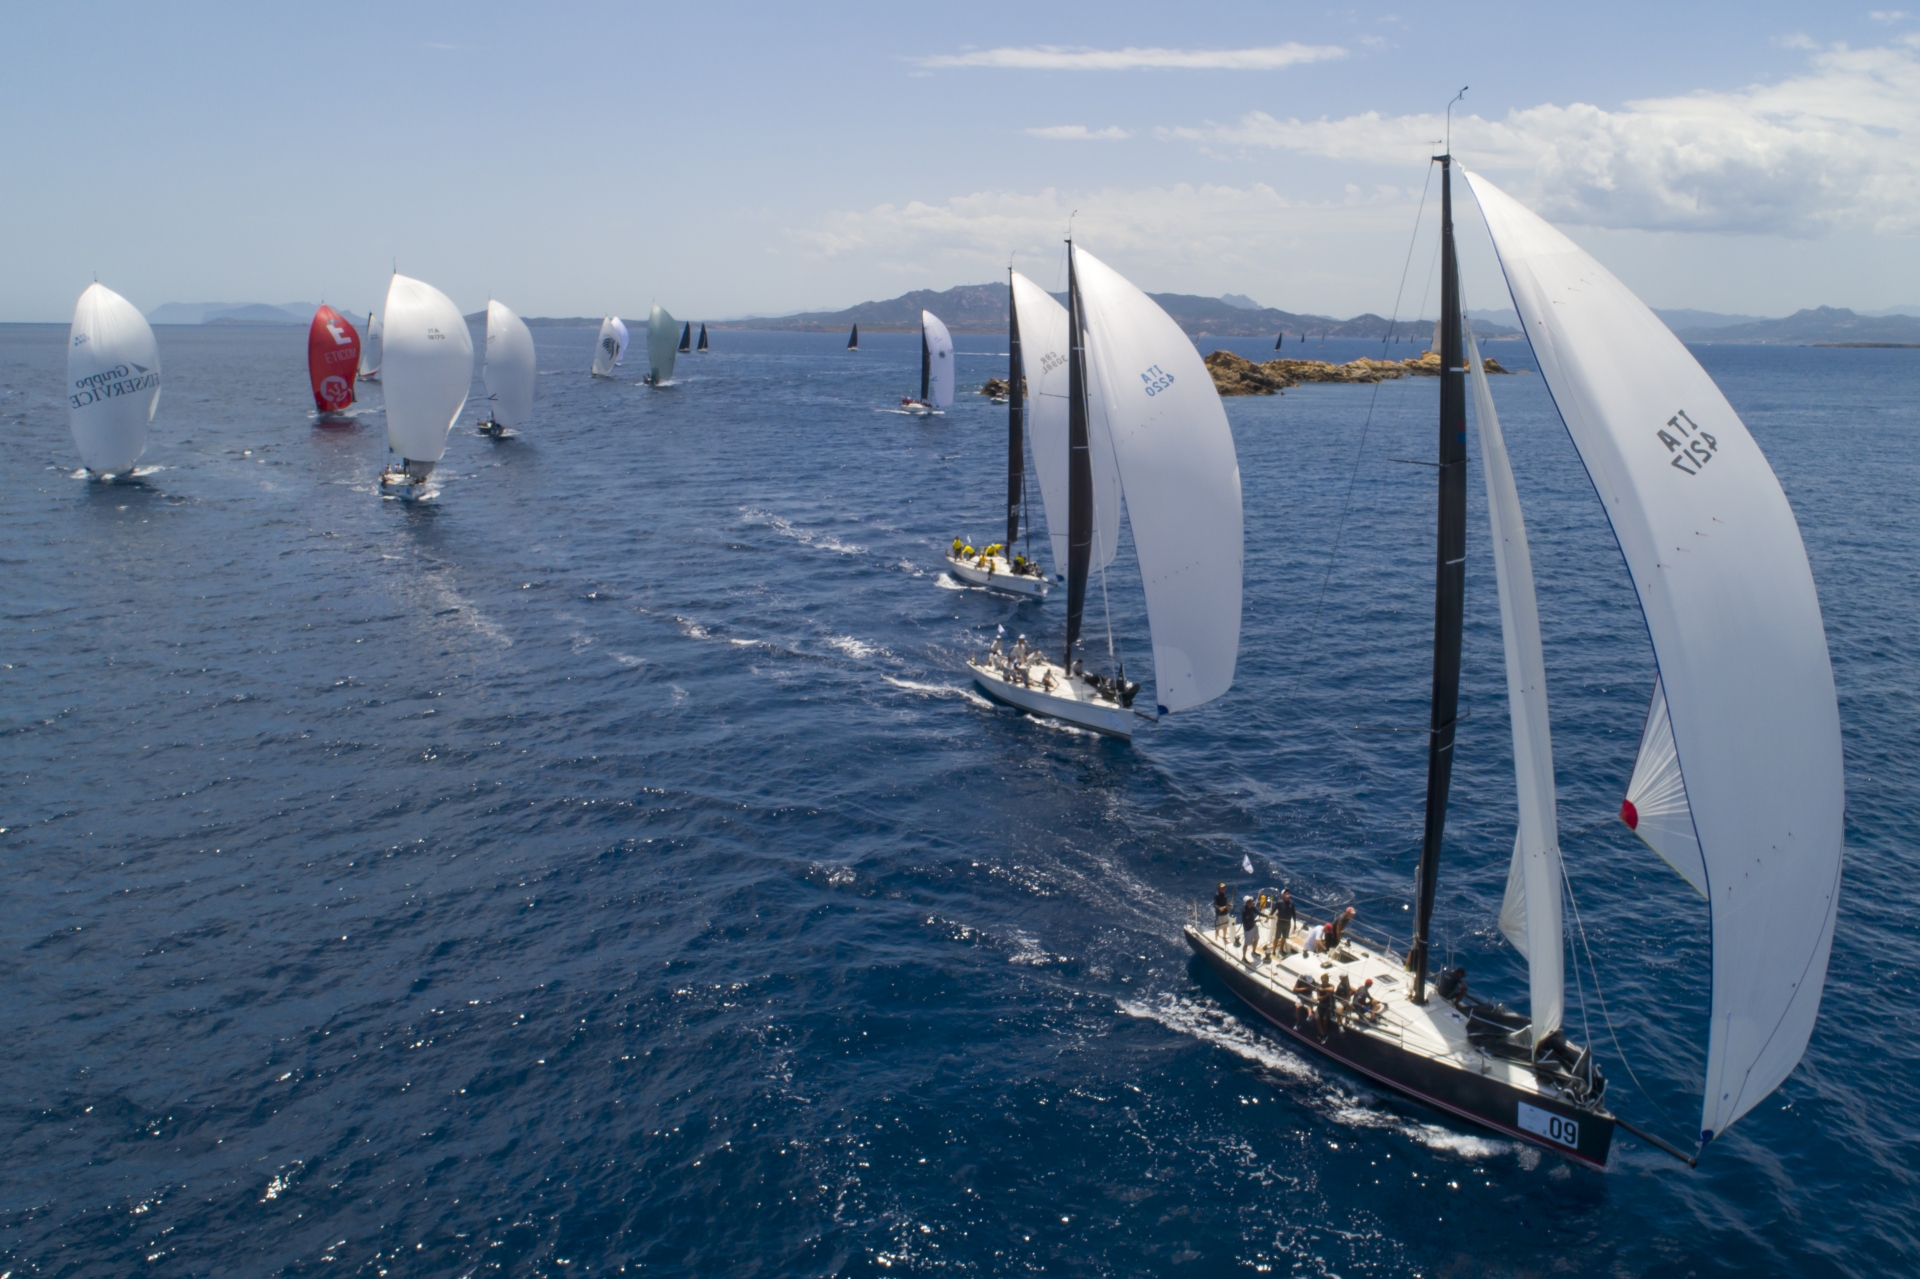 Slow but close racing offshore at the start of the 2022 ORC World Championship - NEWS - Yacht Club Costa Smeralda